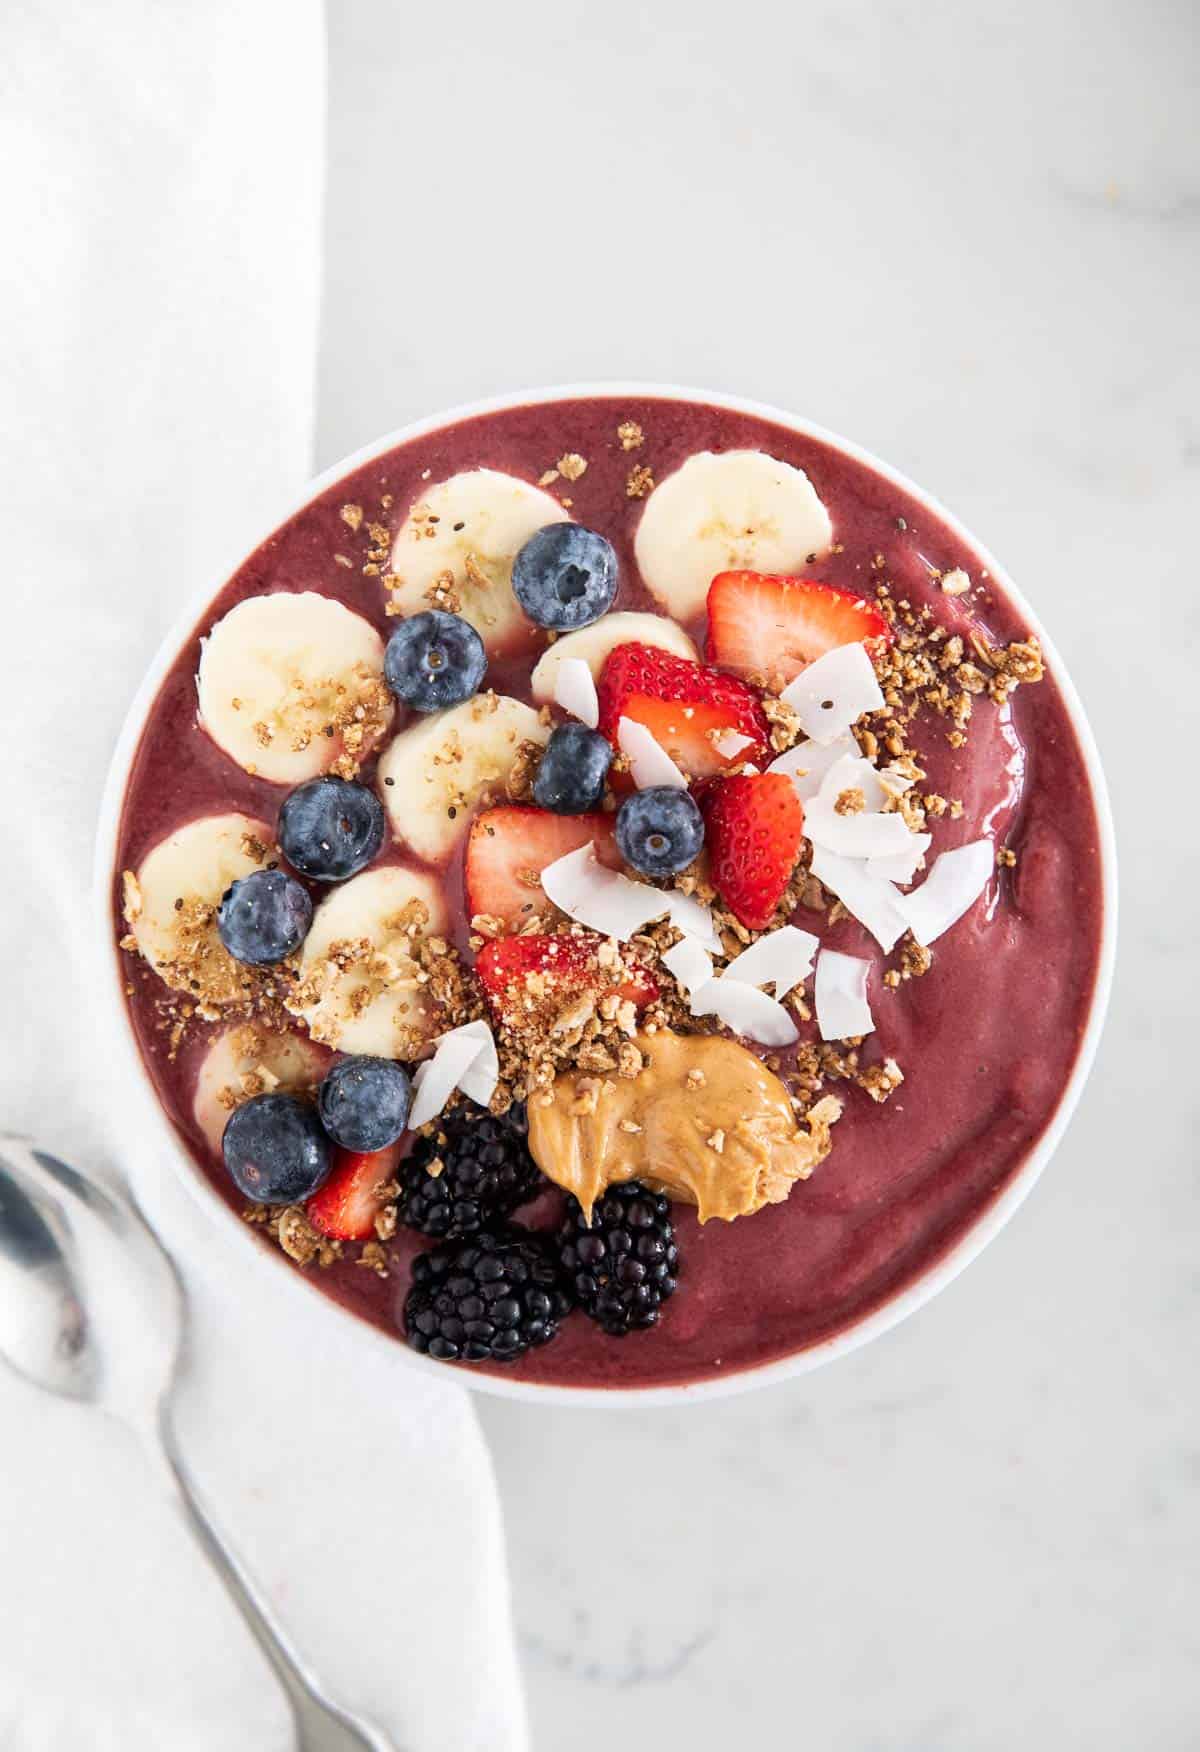 Acai smoothie in bowl with fruit and toppings.